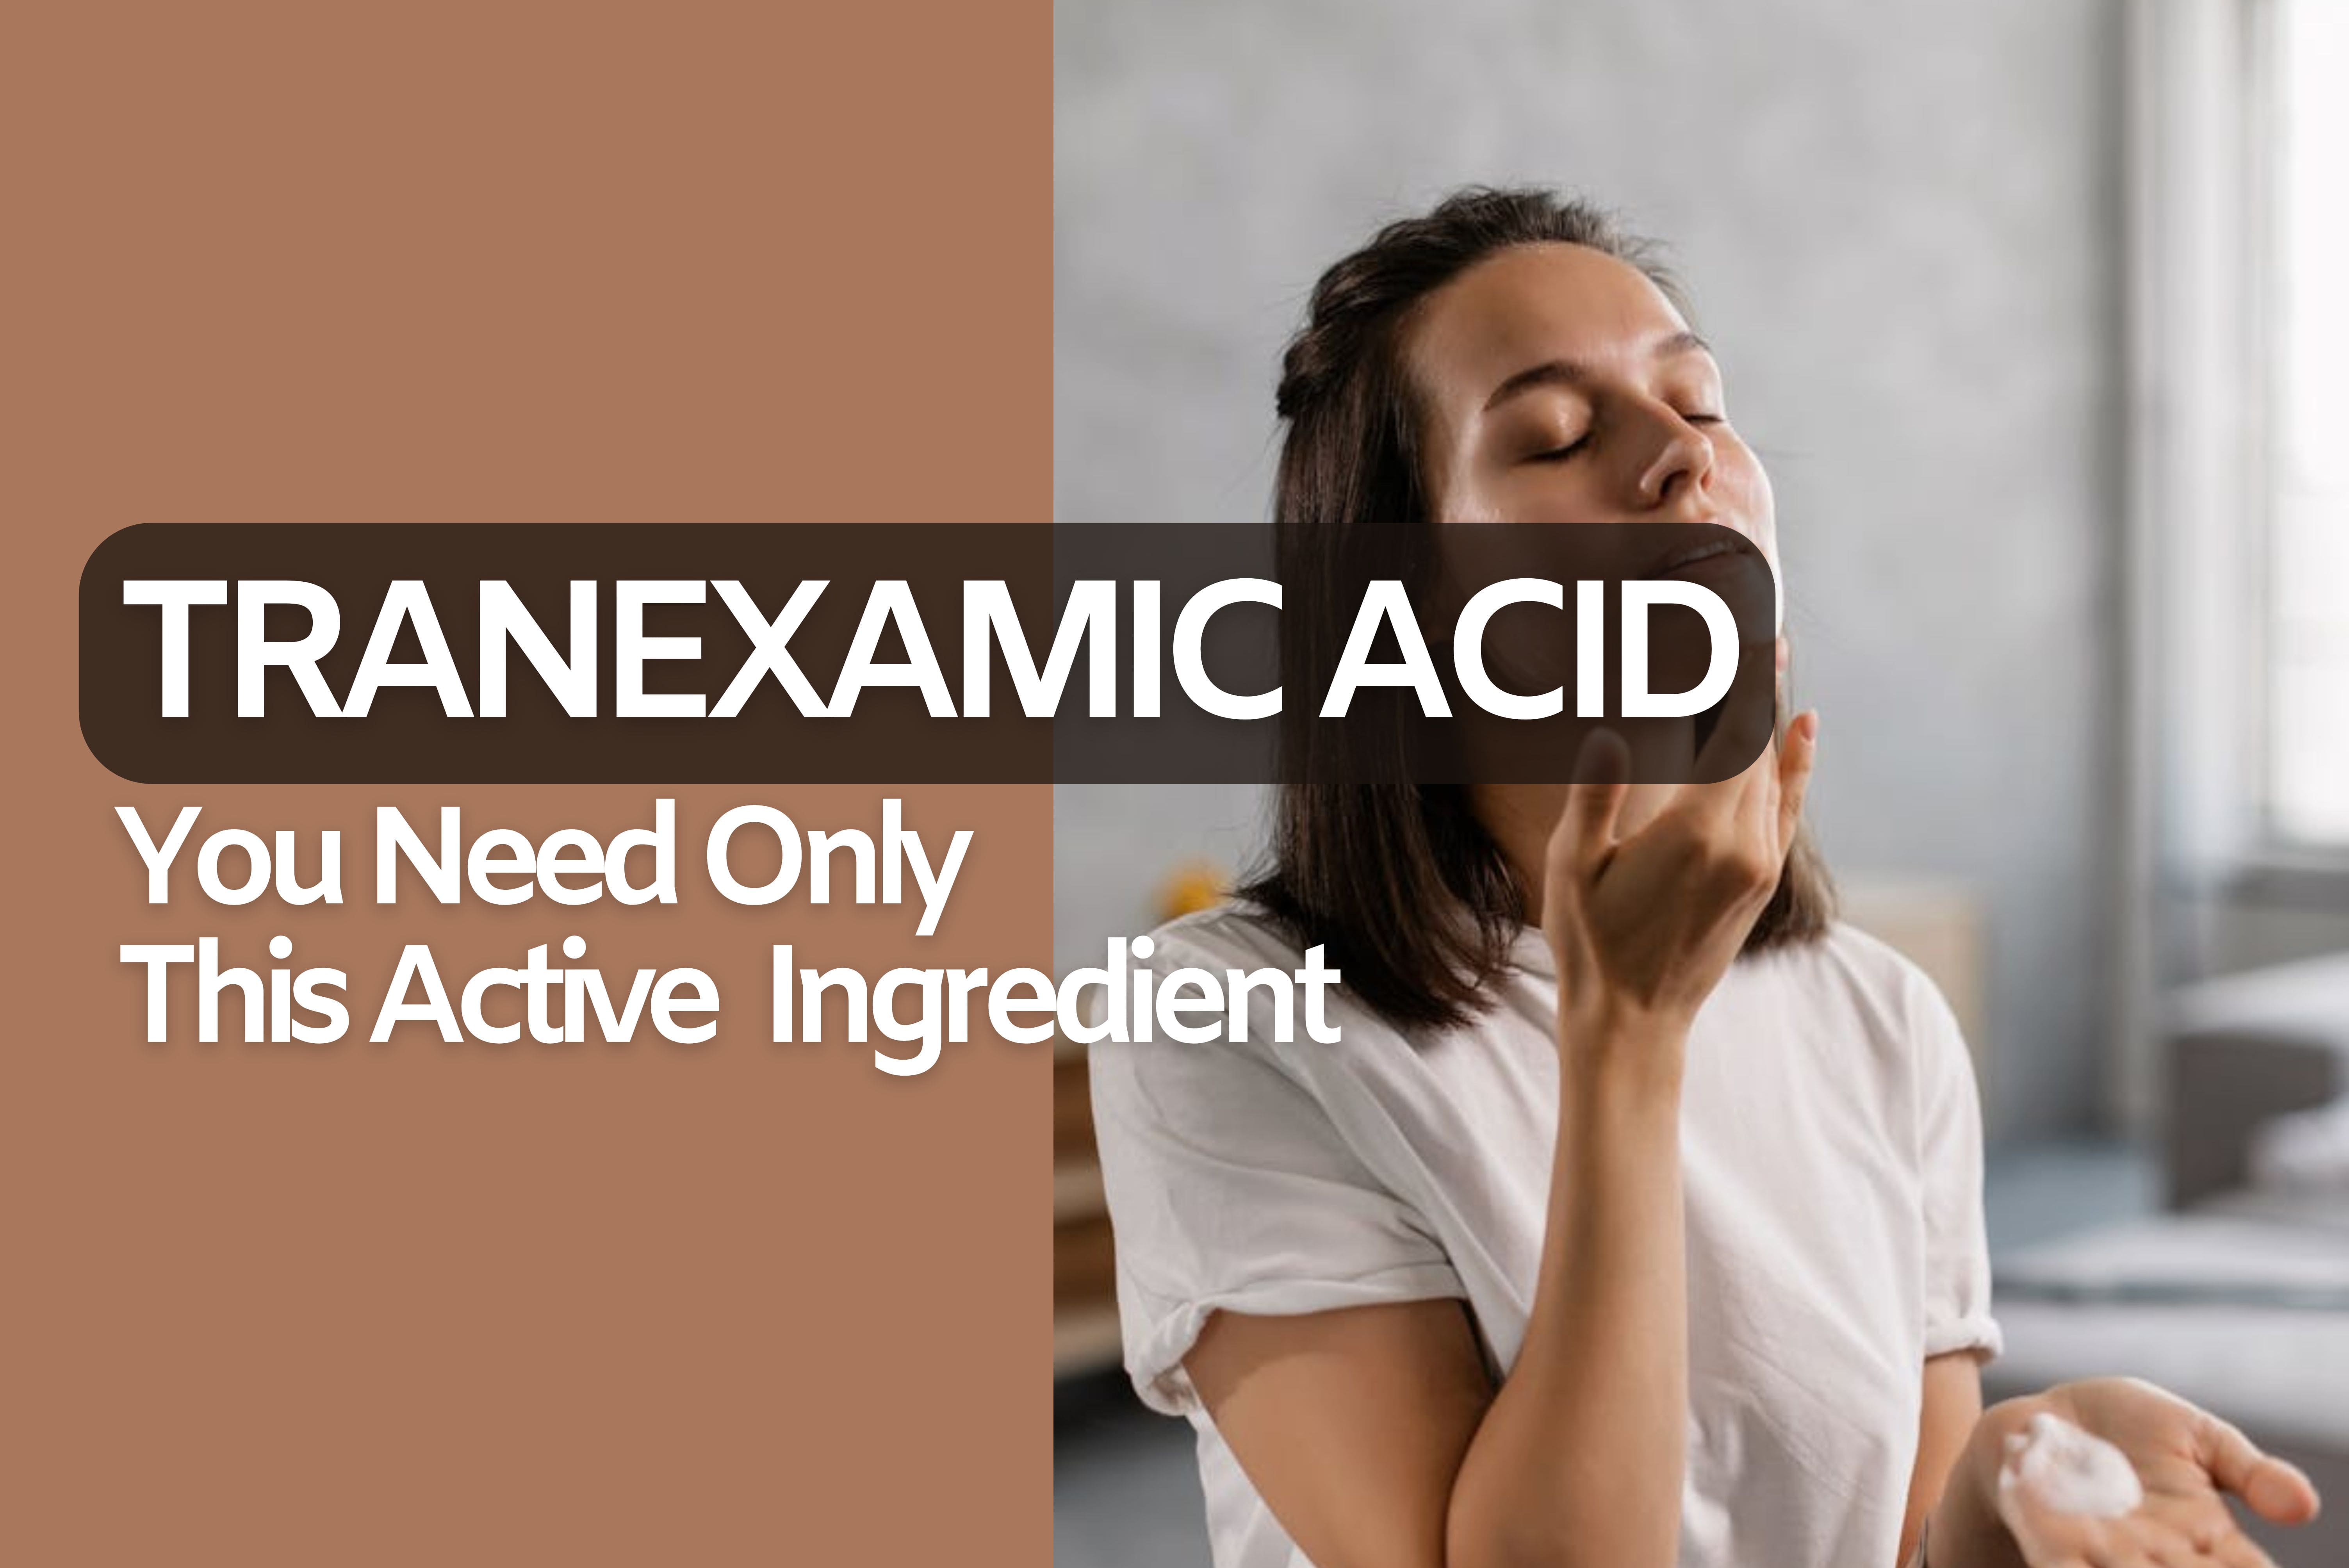 TRANEXAMIC ACID FOR SKIN: KNOW BENEFITS, AND HOW TO USE IT